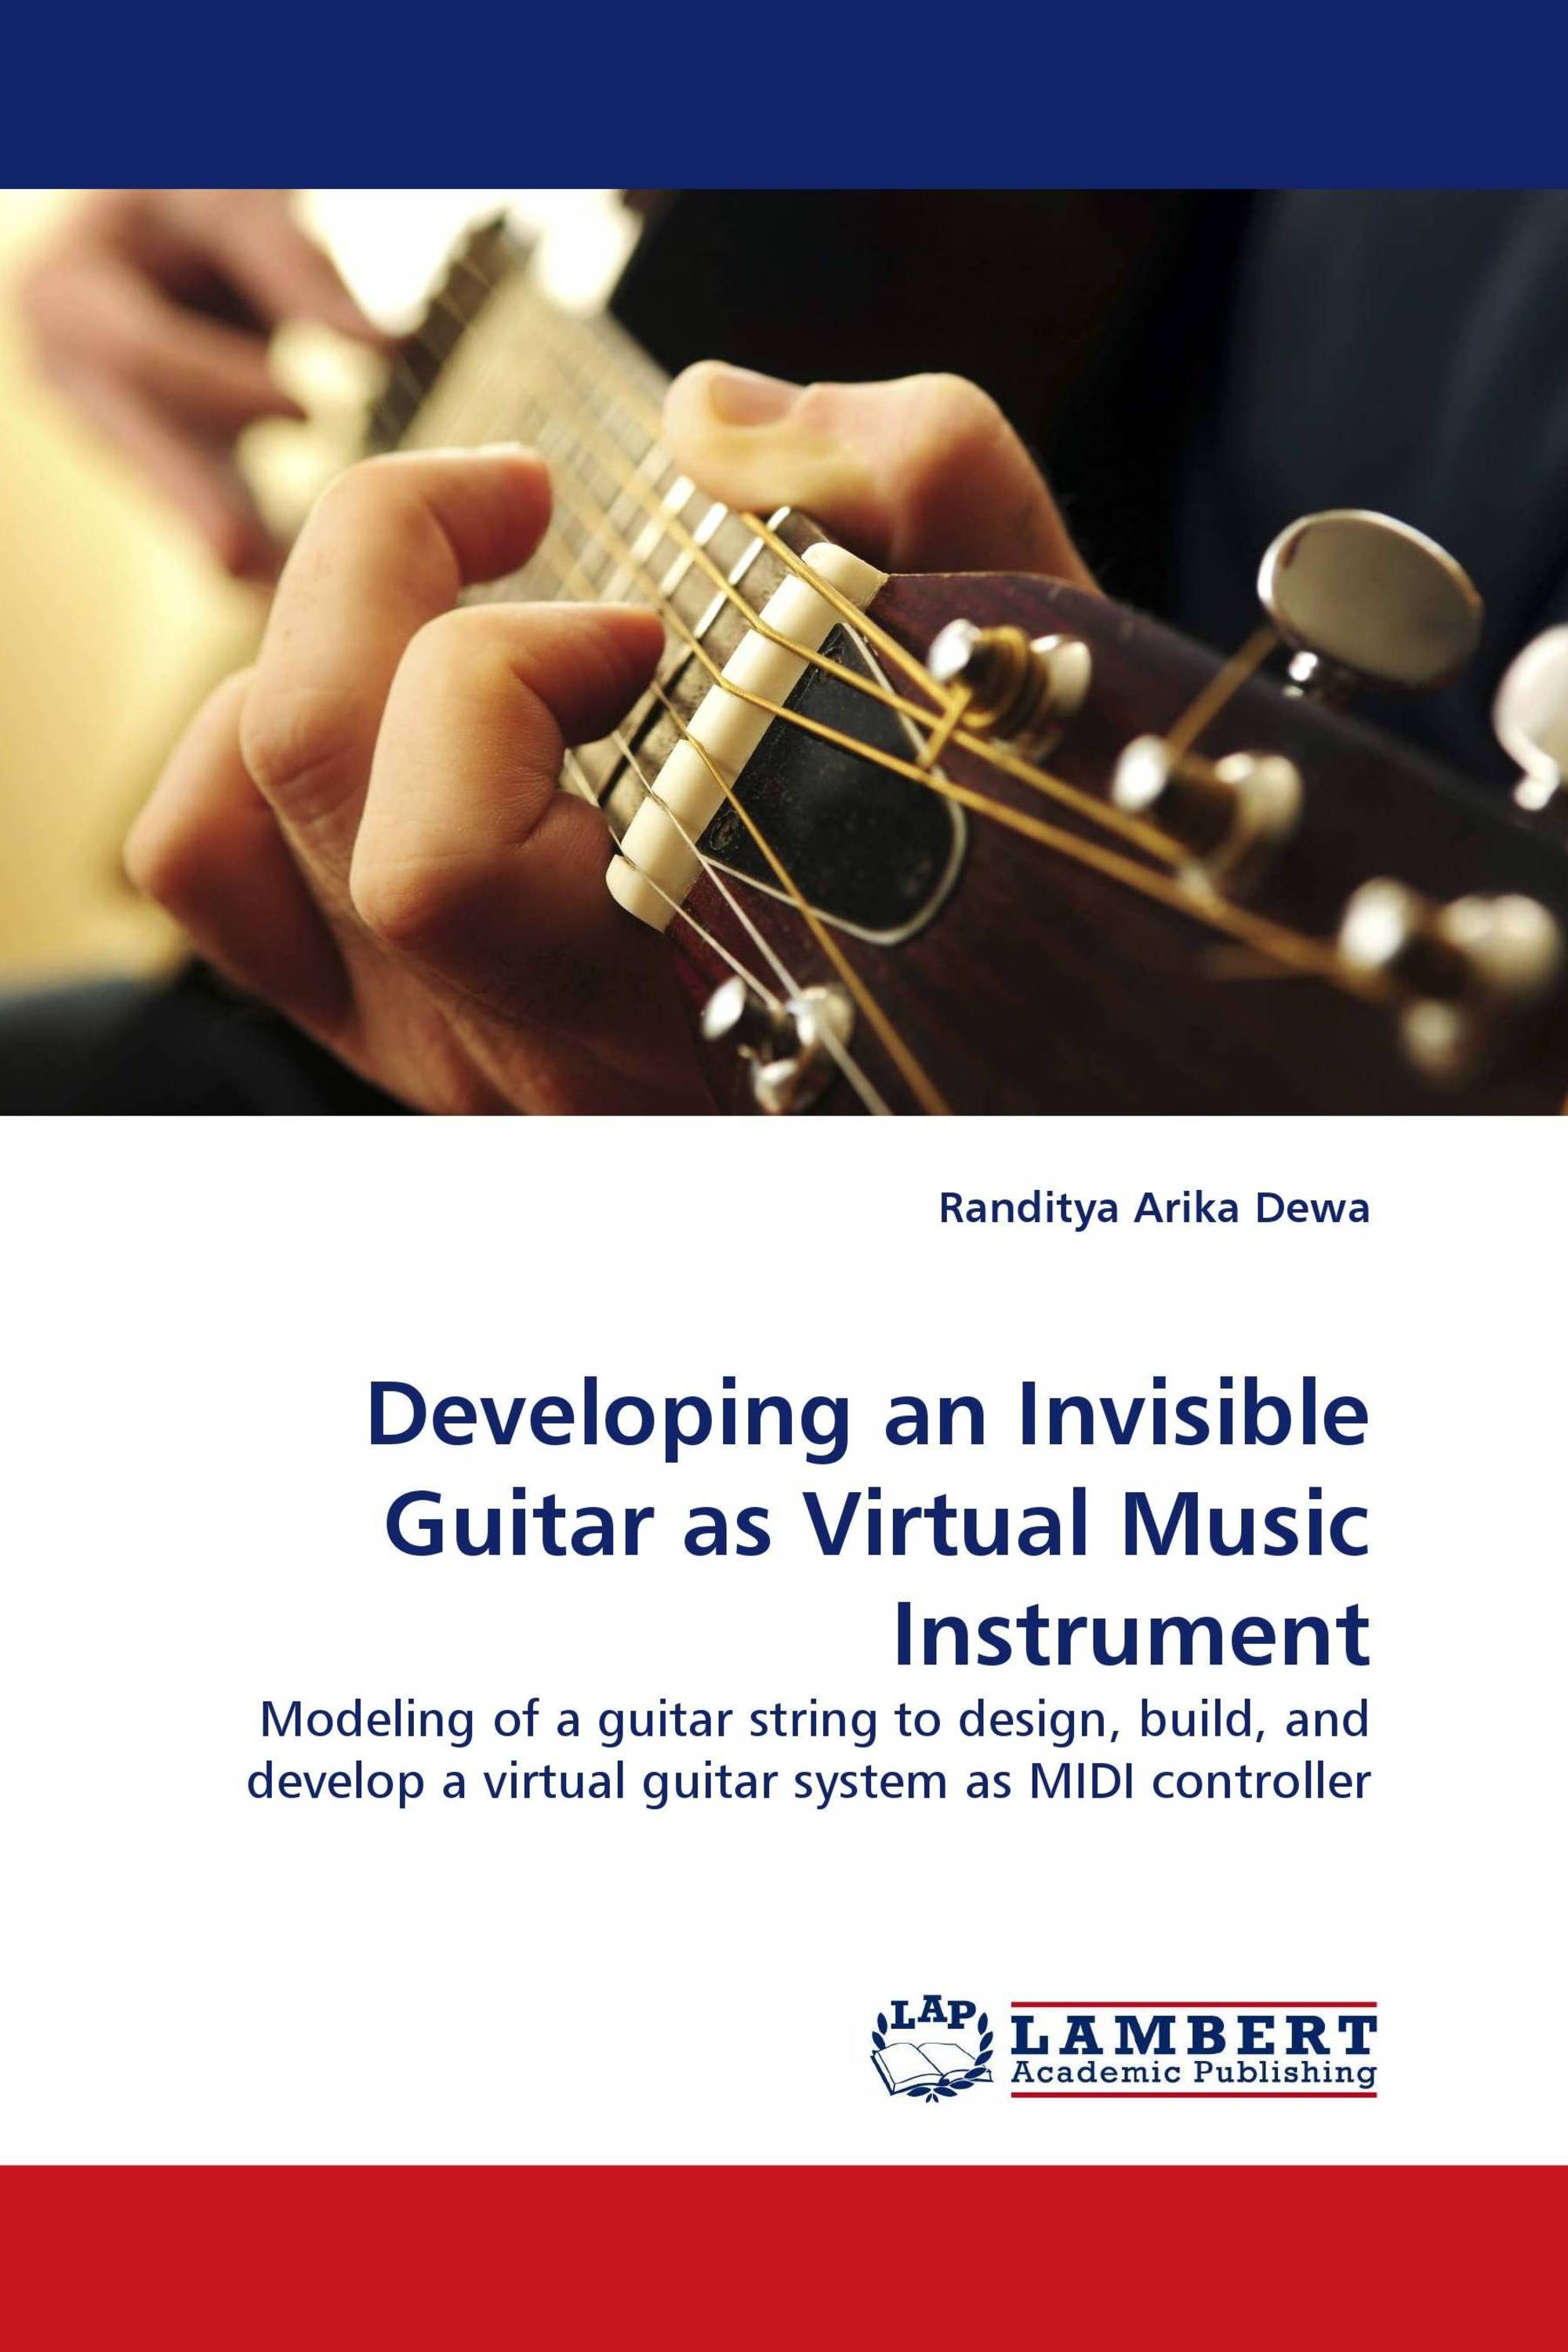 Developing an Invisible Guitar as Virtual Music Instrument